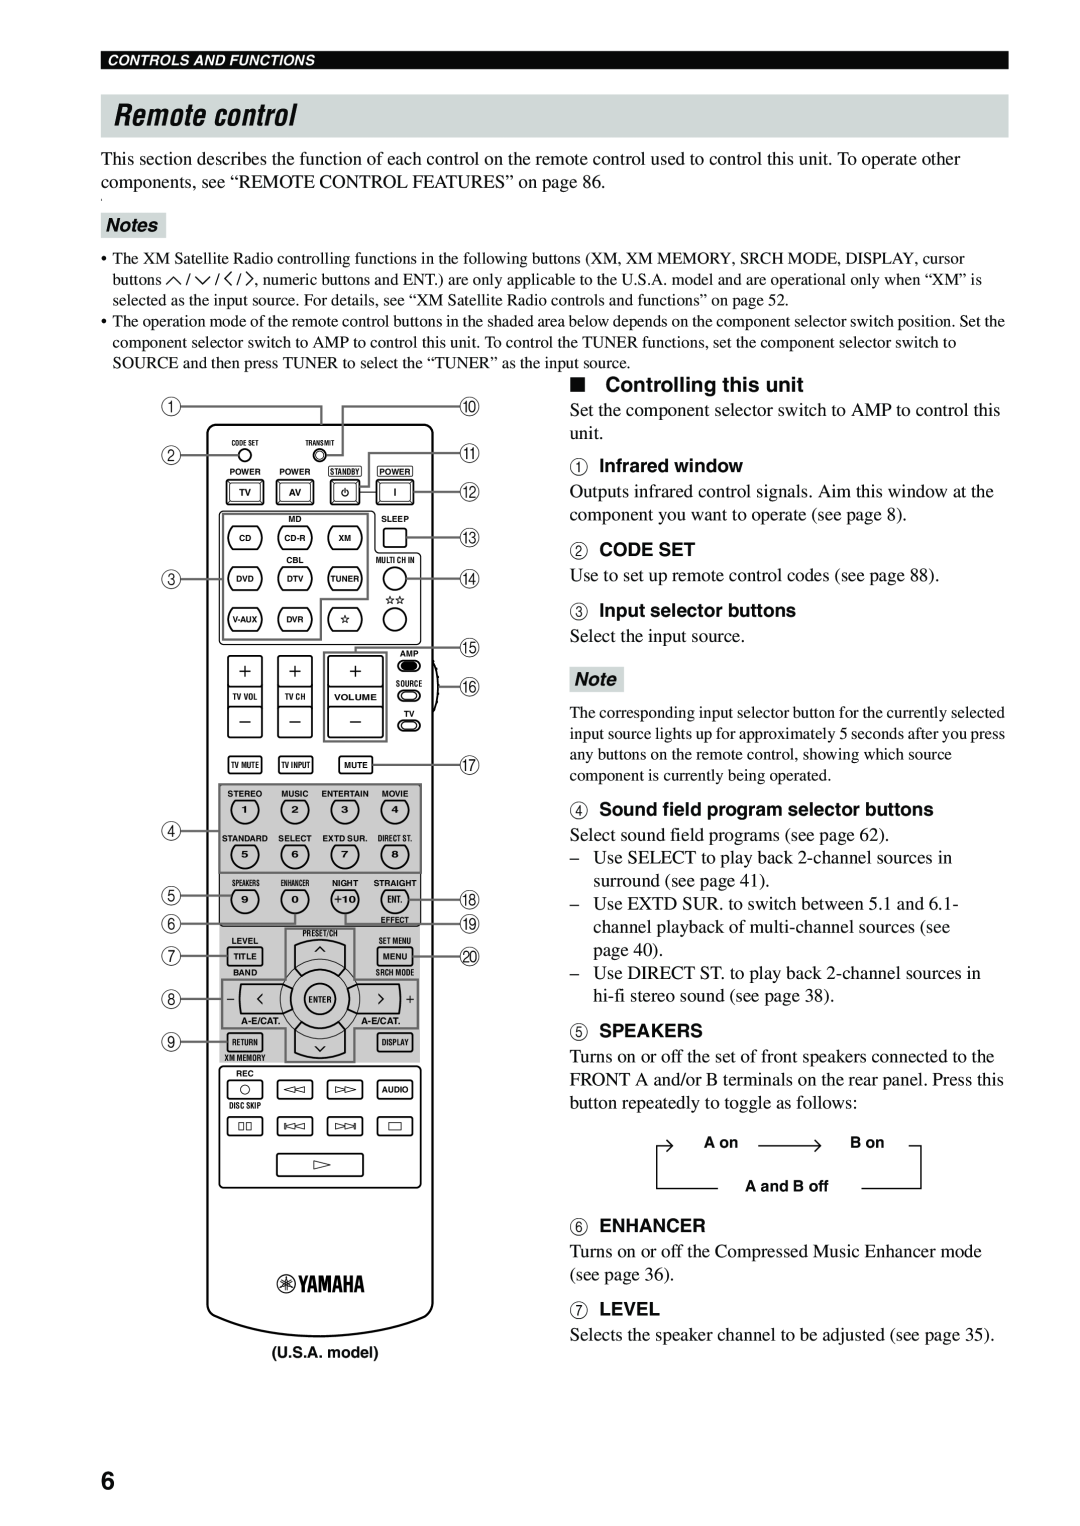 Yamaha HTR-5940 AV owner manual Remote control, Controlling this unit 